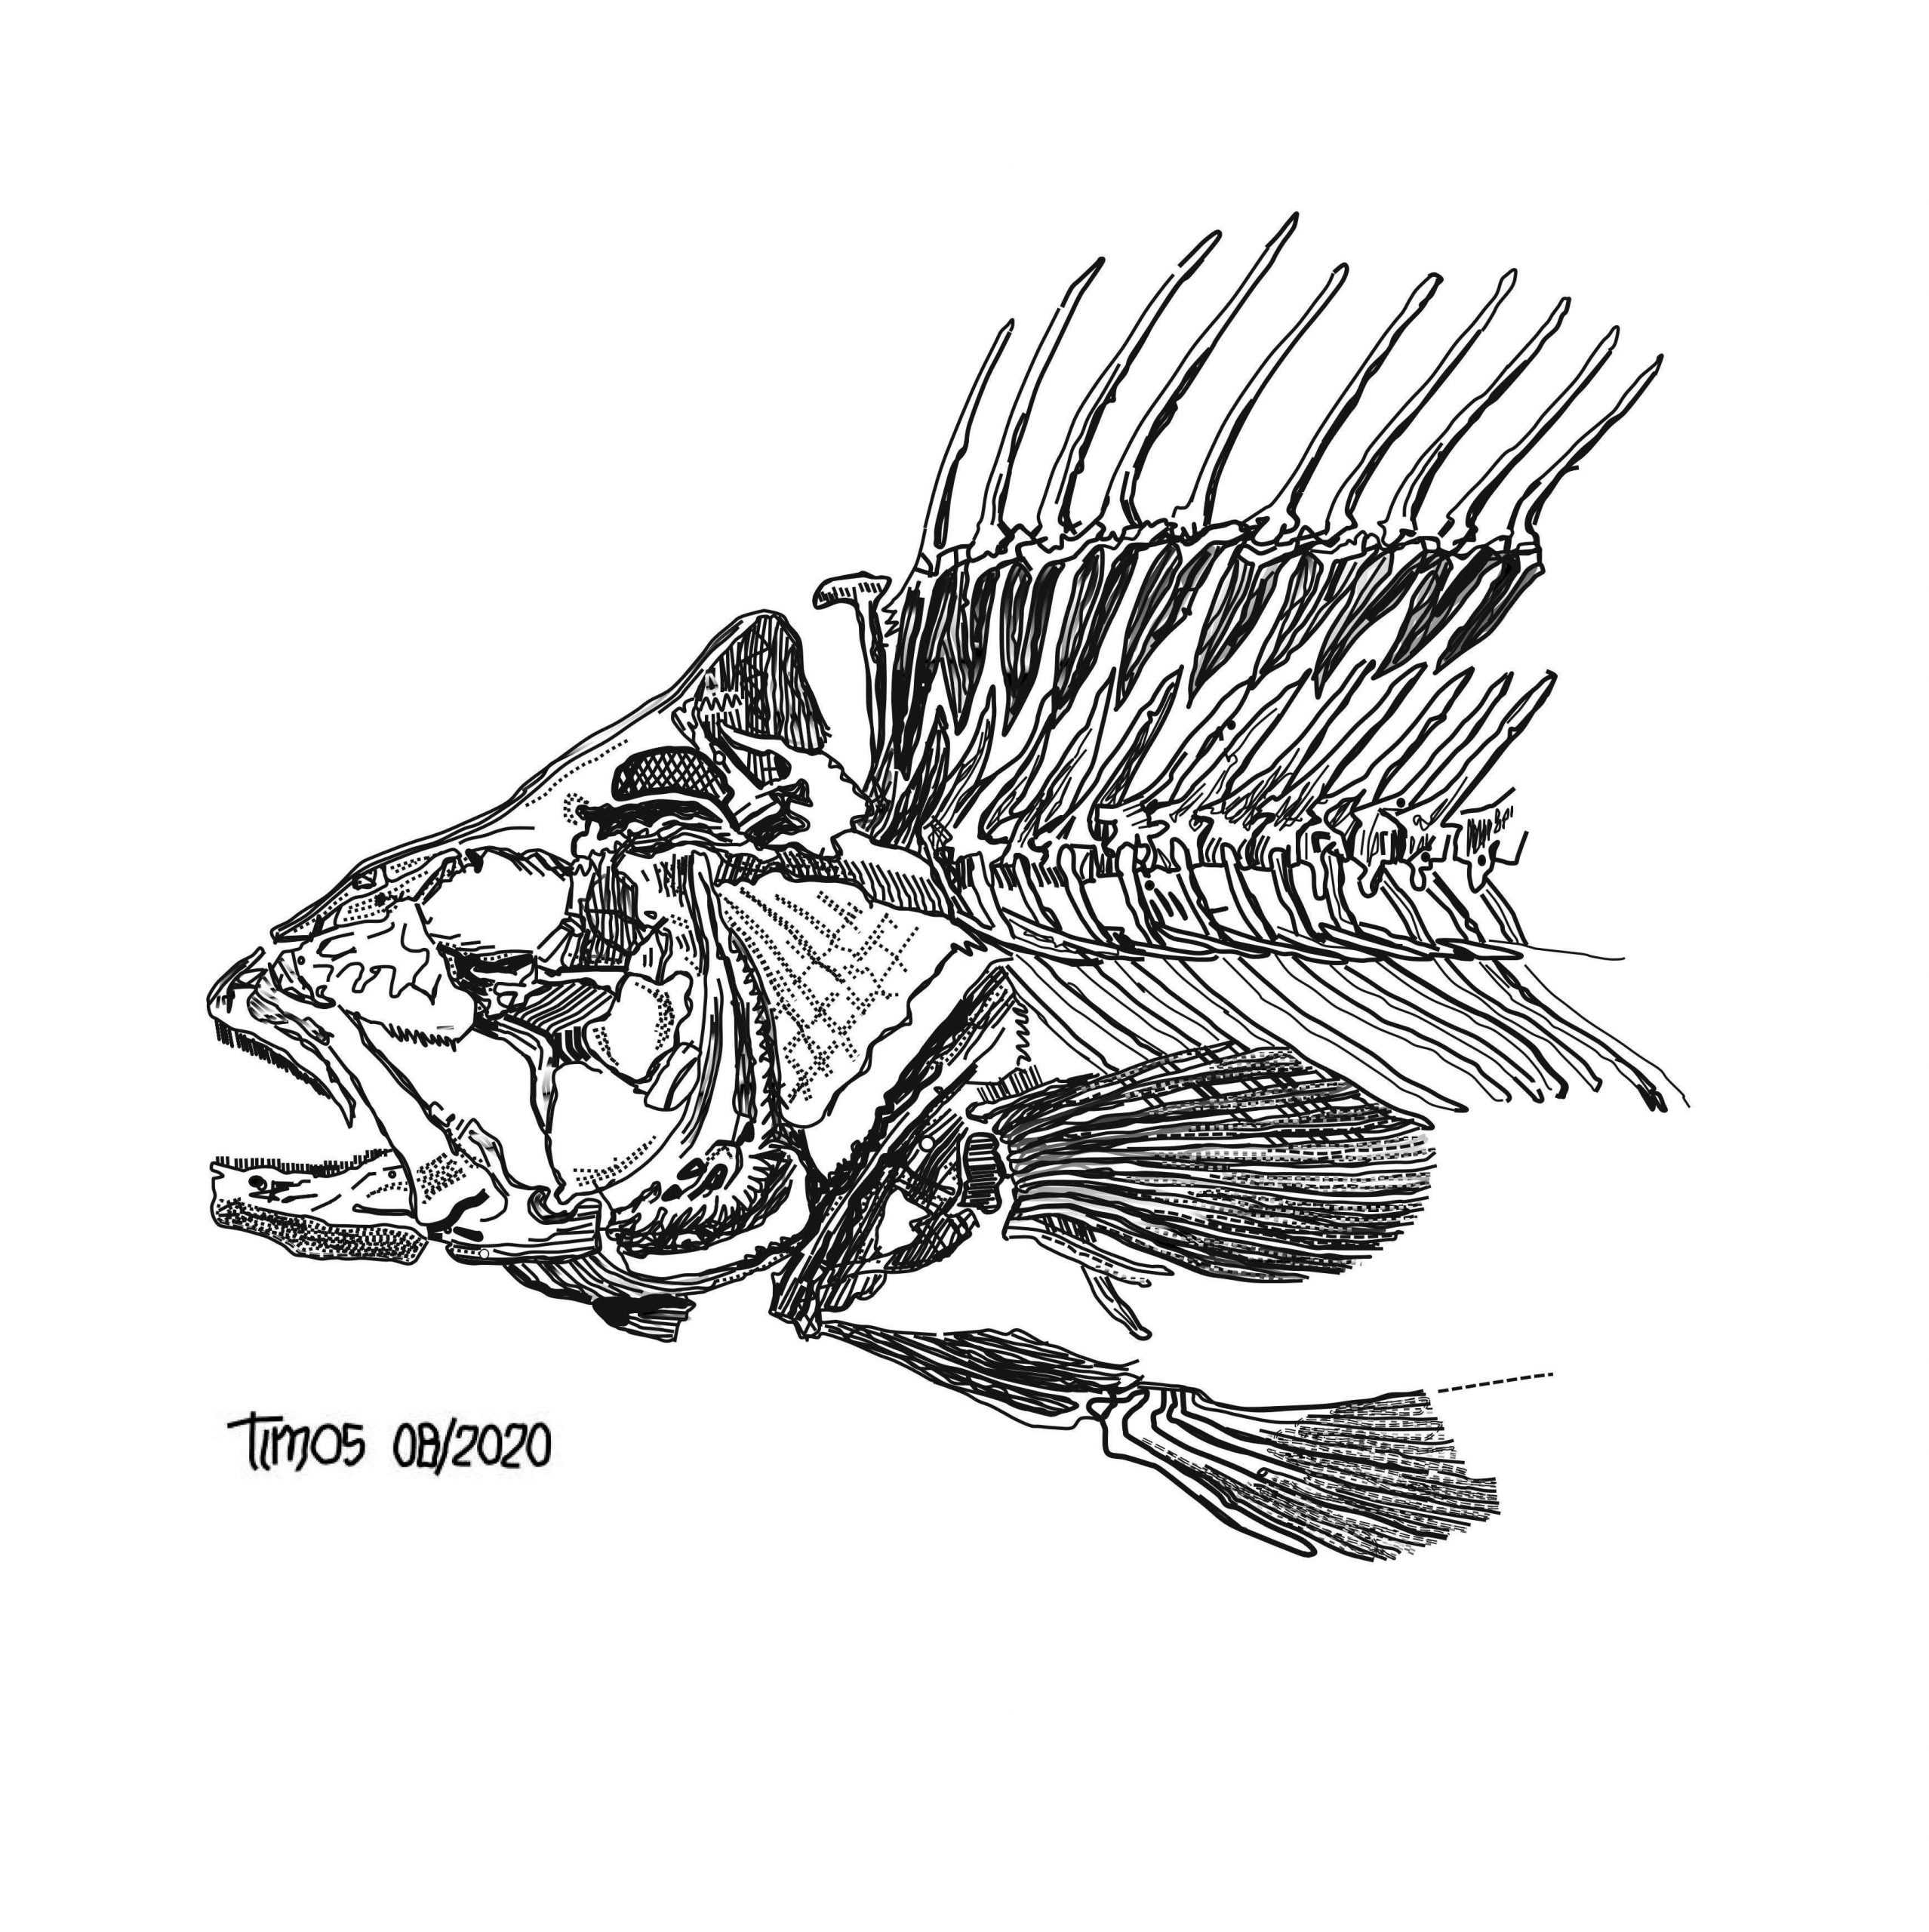 fish skeleton \ front and mid-section